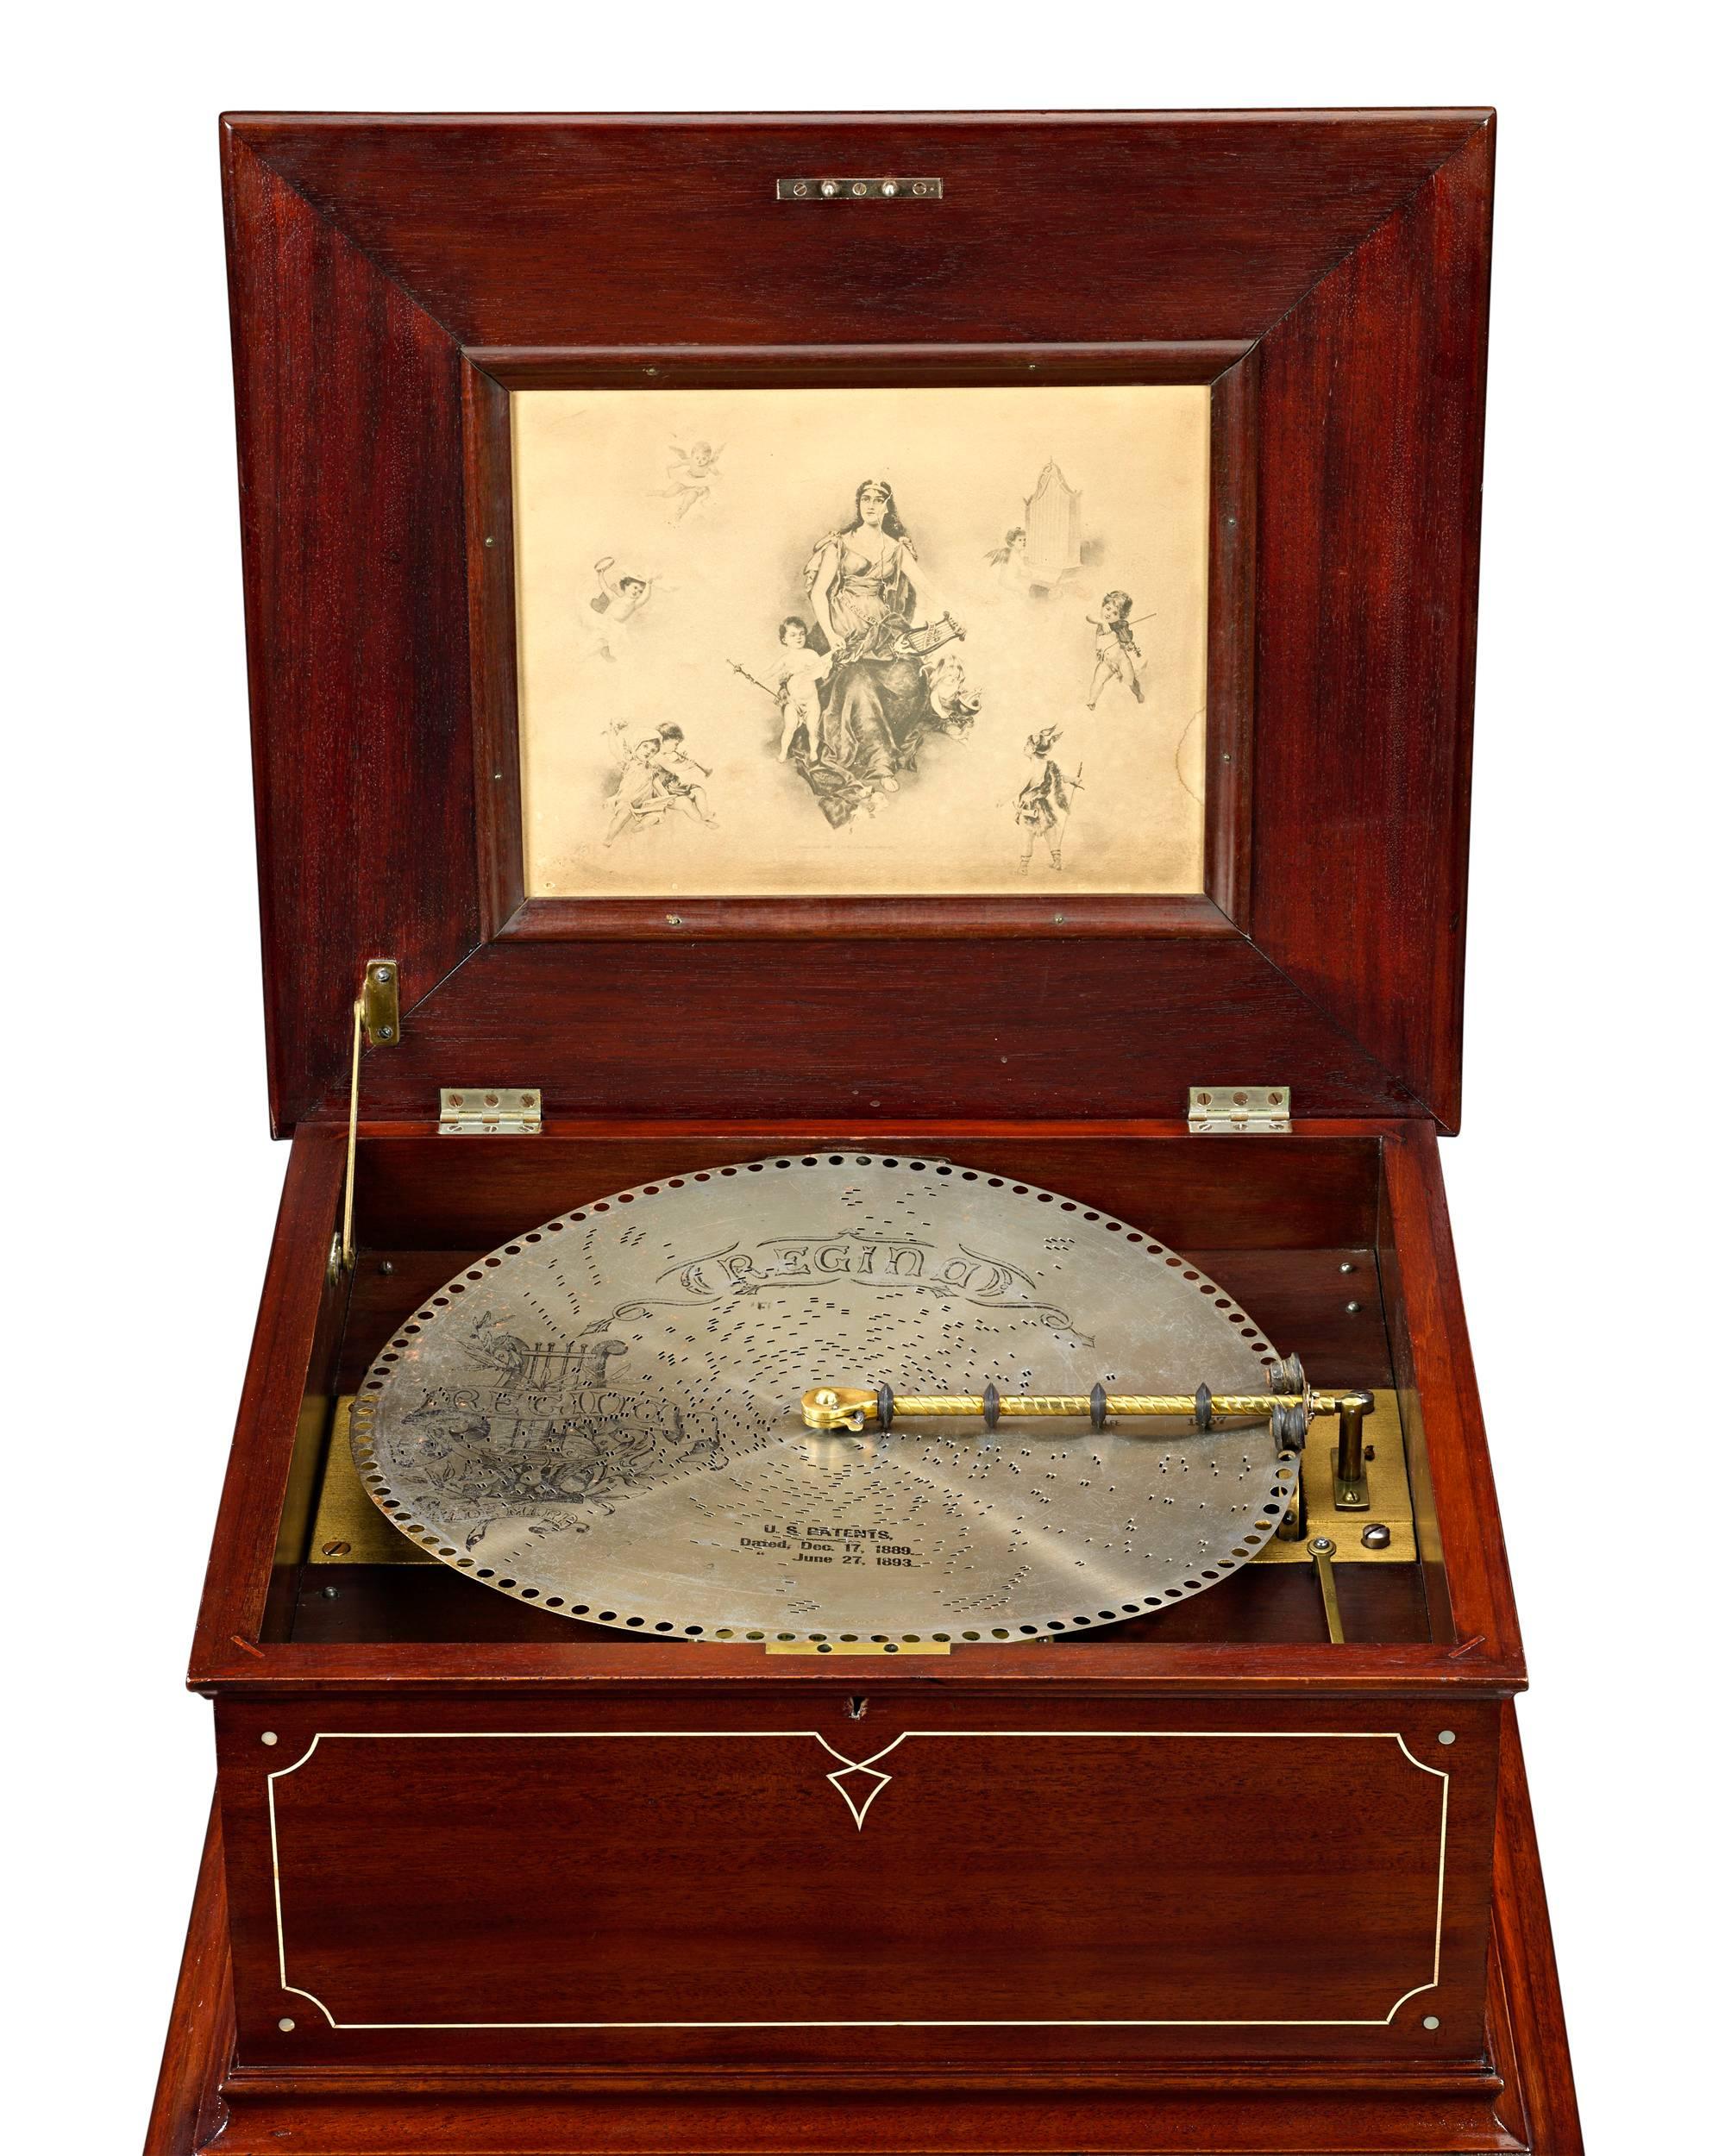 This outstanding disc music box was created by the Regina Music Box Company of New York. The box, known as Style 11, plays 15 1/2” disks on a single comb and retains the incredible sound quality for which Regina was celebrated. The mechanism is